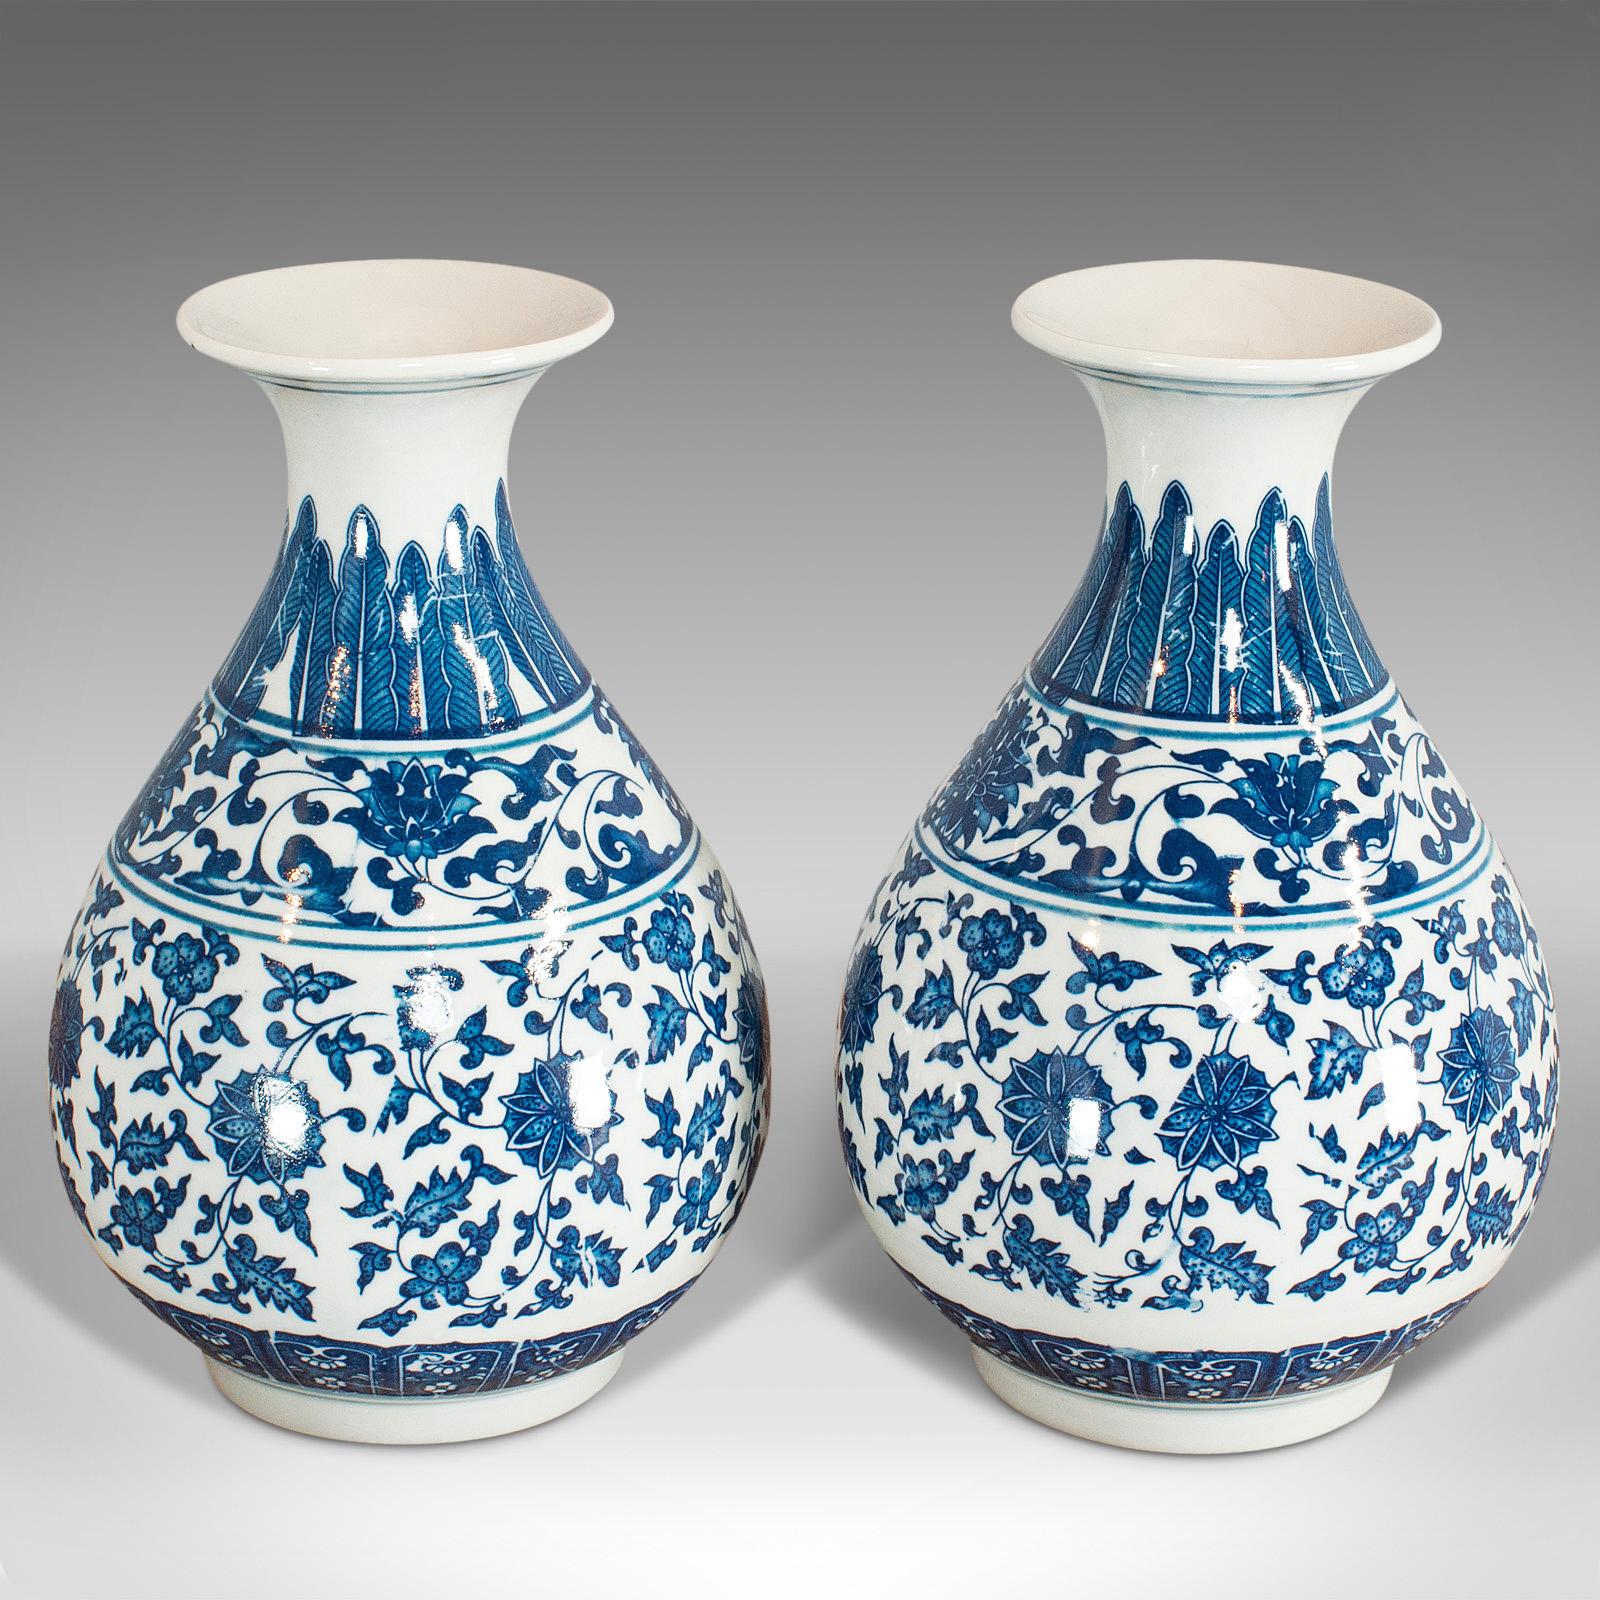 This is a pair of vintage decorative vases. An Oriental, ceramic baluster urn with painted detail, dating to the late 20th century, circa 1990.

Attractive vases with good detail
Displays a desirable aged patina
Ceramic in good order